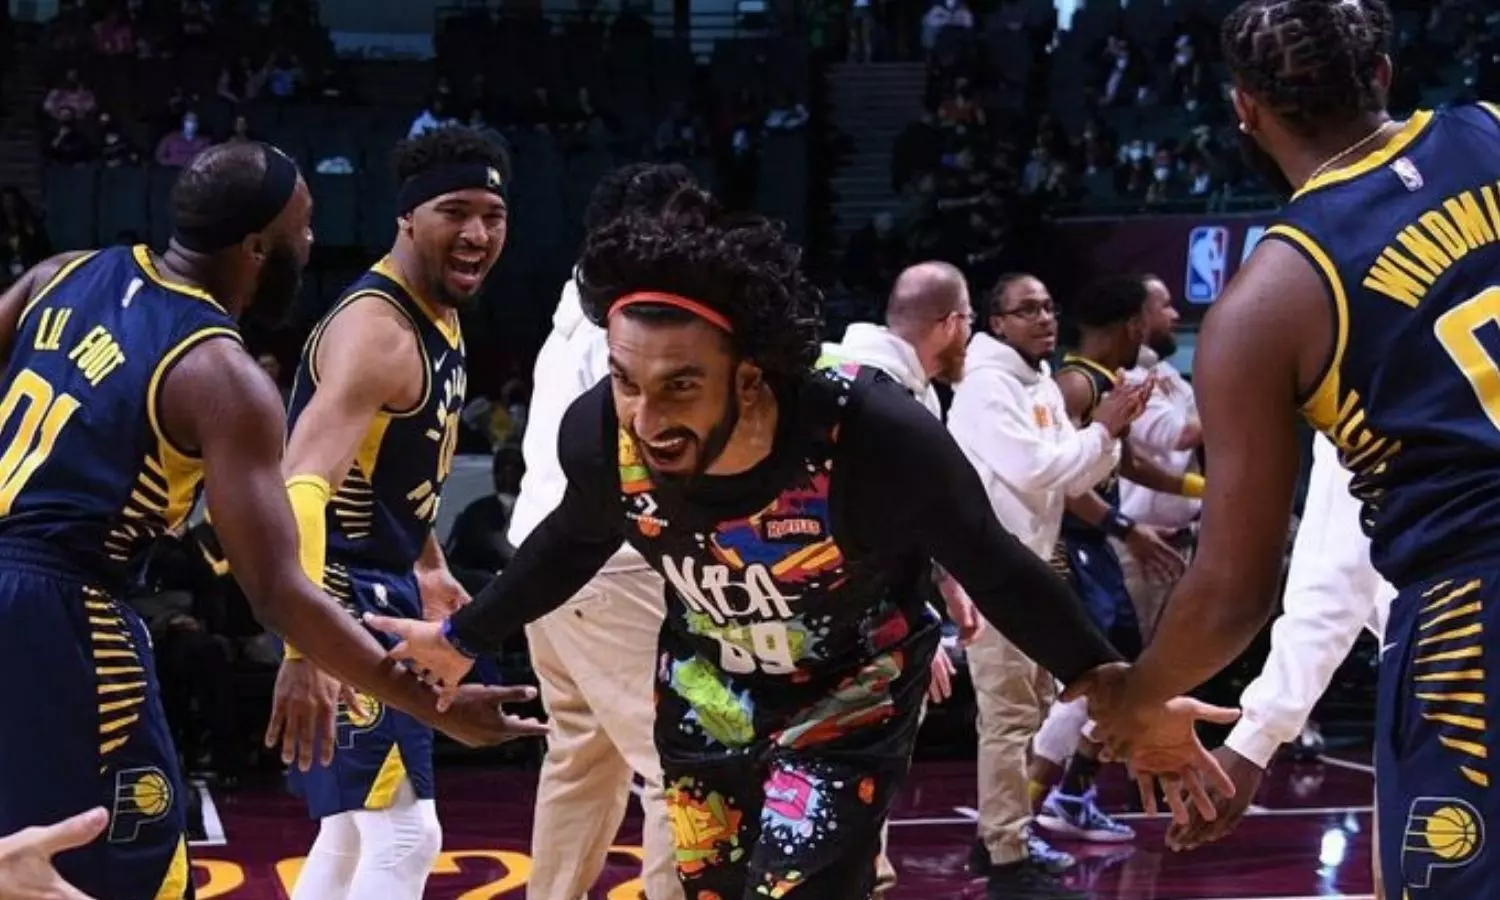 Ranveer Singh to take his shot on the NBA Court for All Stars Game - IMDb